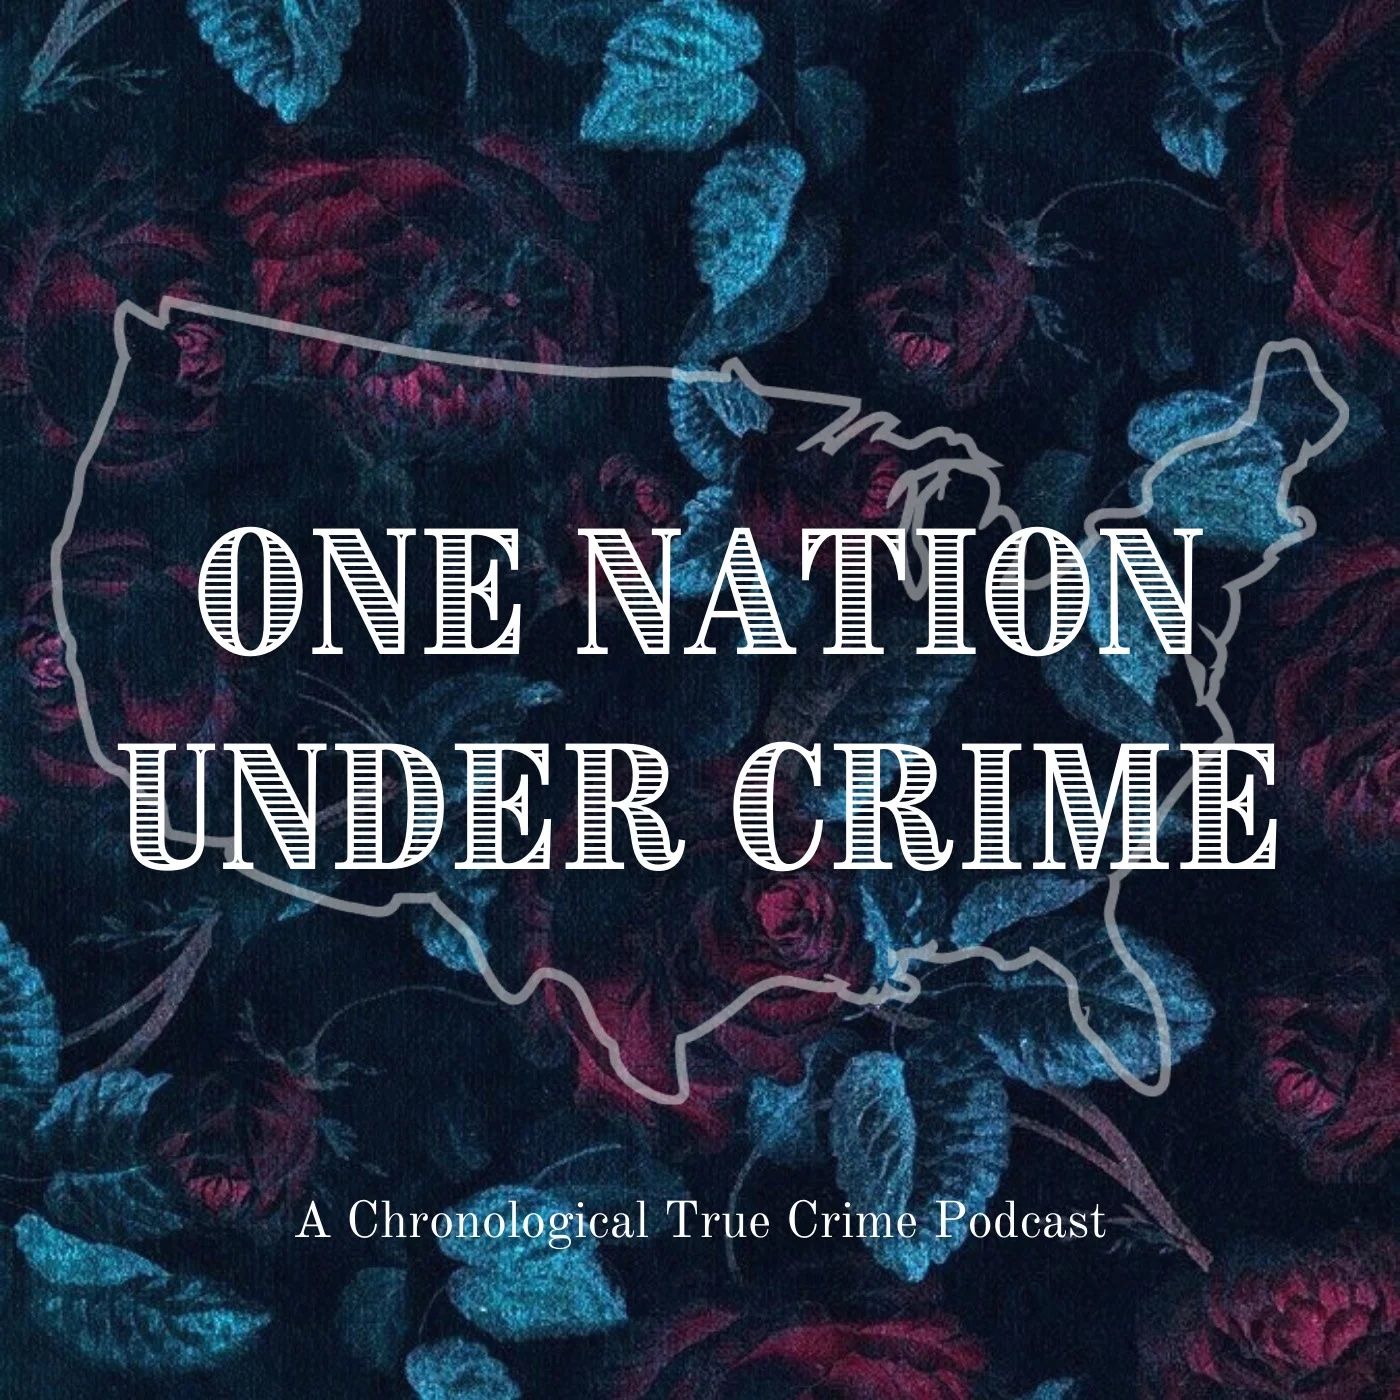 1836: The Murder of ”The Girl in Green” Helen Jewett by One Nation Under Crime